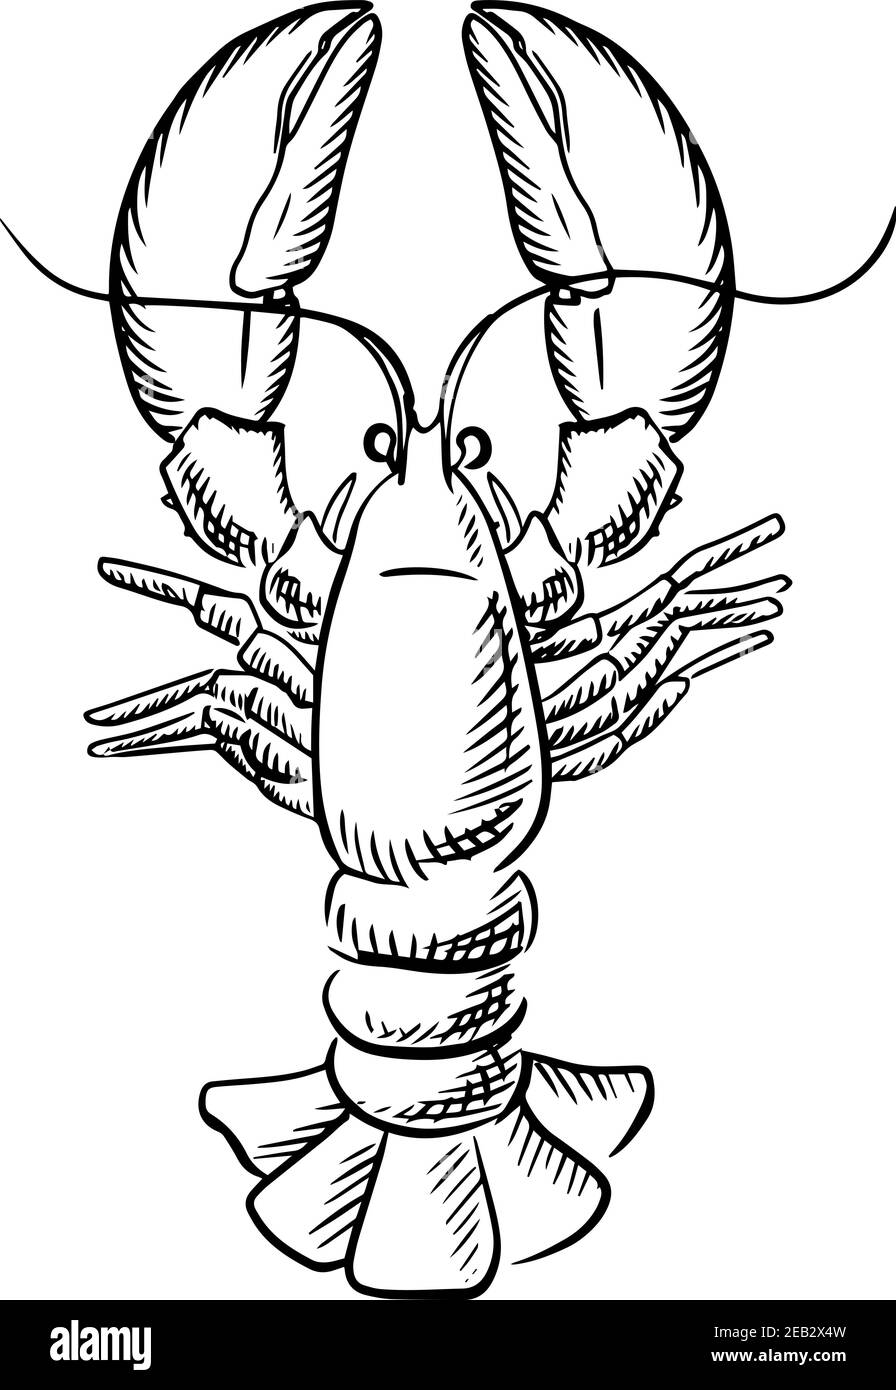 How to Draw a Lobster Step by Step  Easy Animals 2 Draw